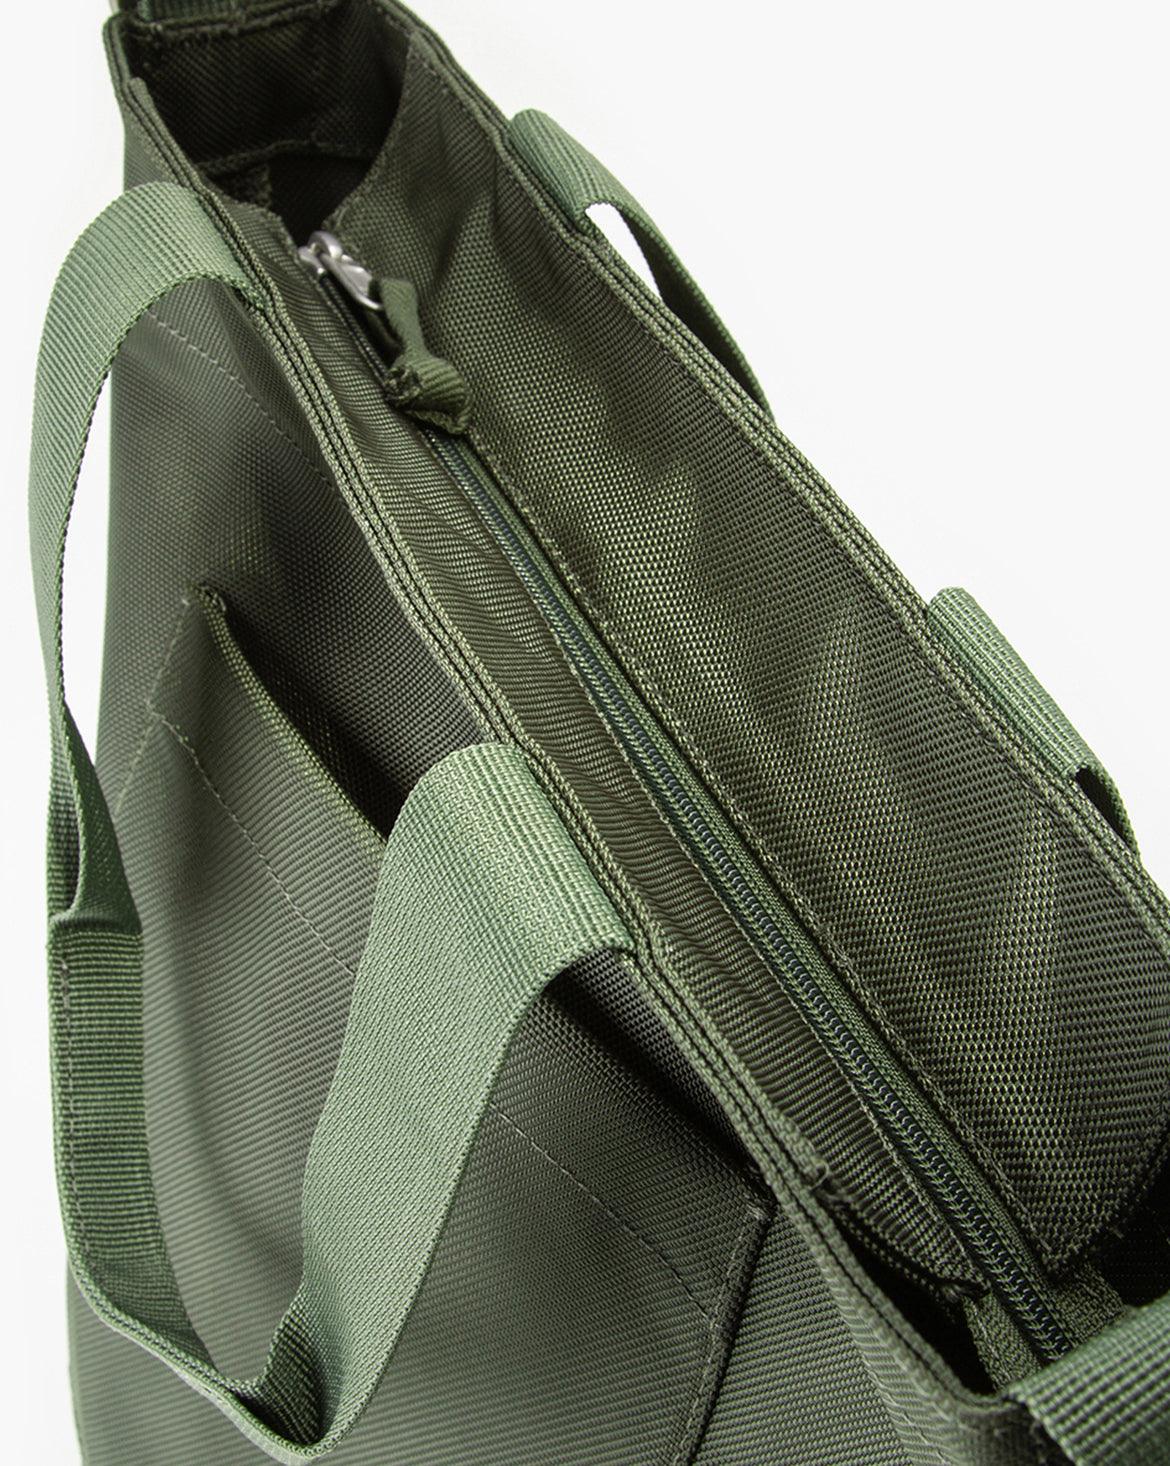 ICON TOTE - BOTTLE GREEN